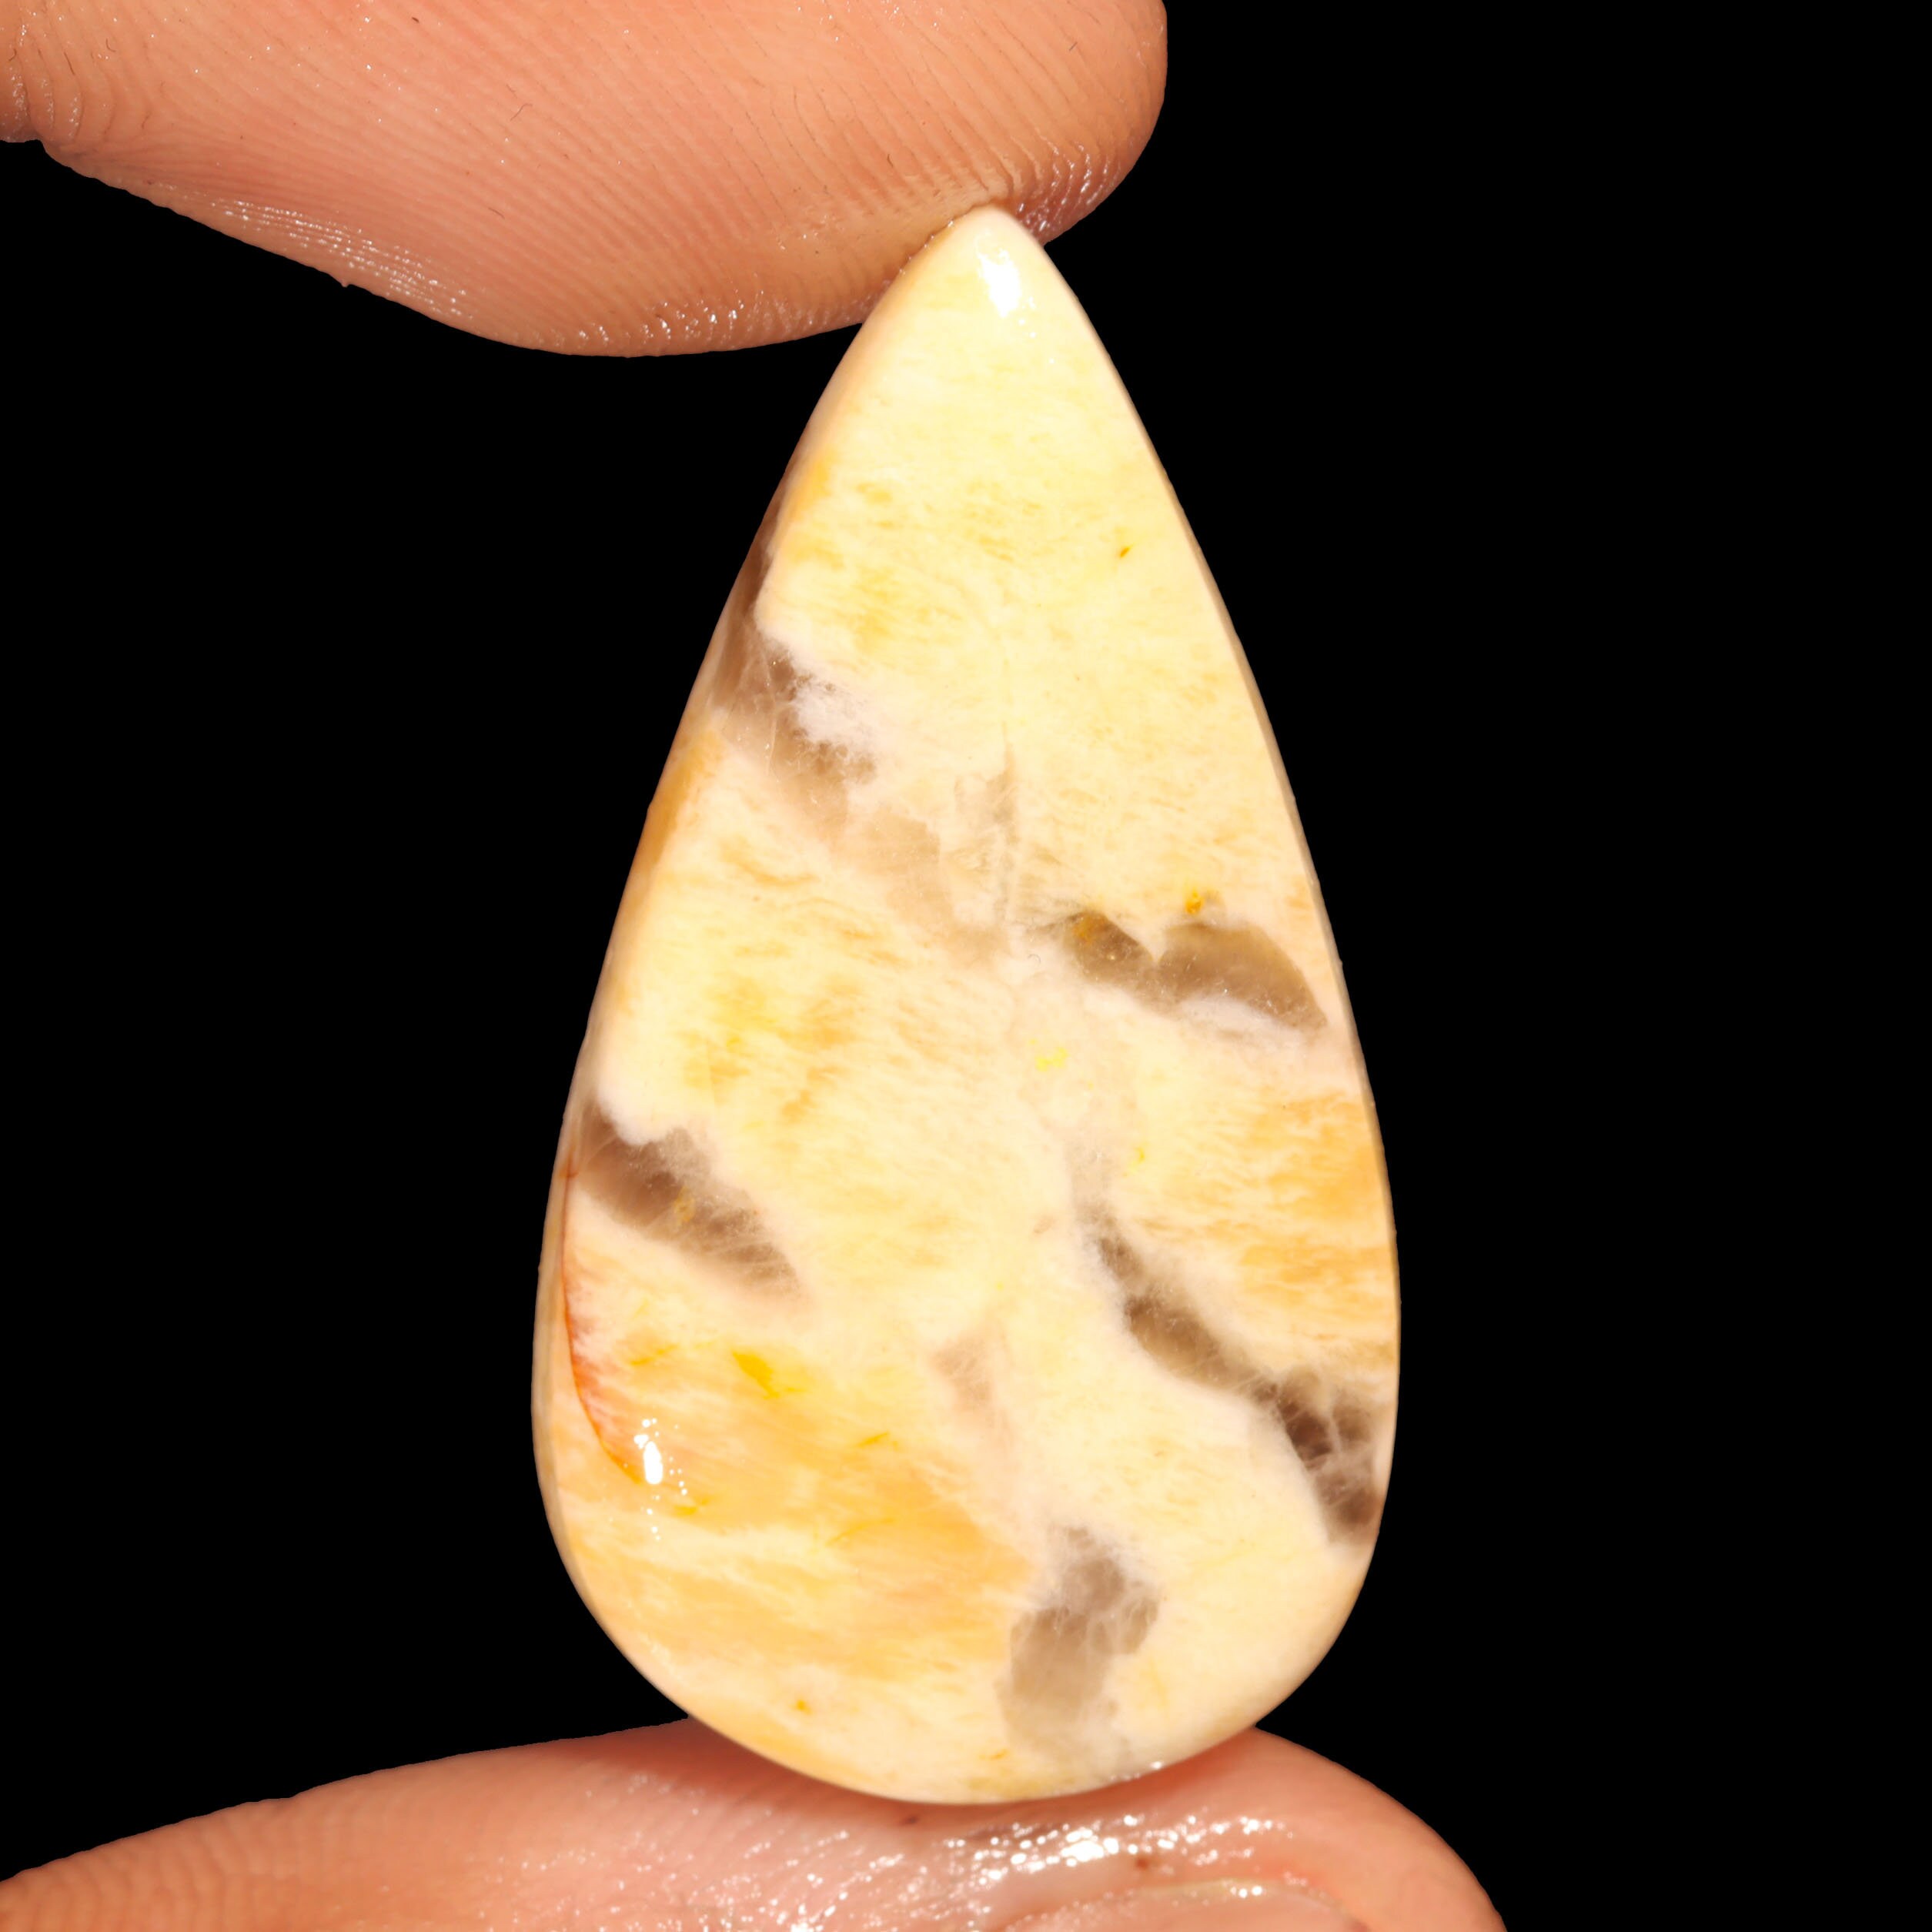 Beautiful Top Grade Quality 100% Natural Graphic Feldspar Egg Shape Cabochon Loose Gemstone For Making Jewelry 30 Ct 30X19X6 mm AA-14804